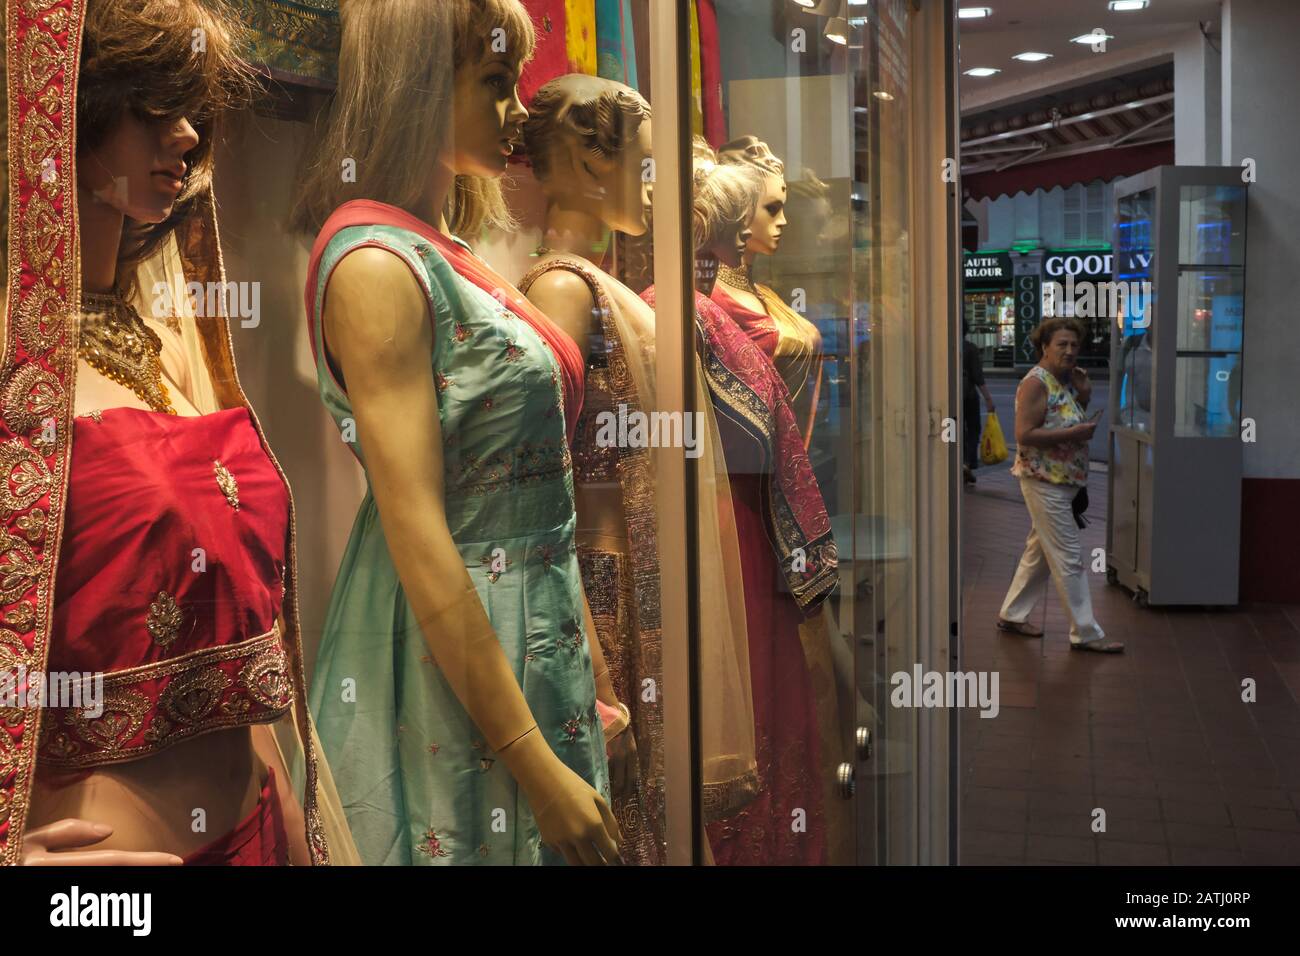 A foreign tourist passes by a shop selling Indian traditional attire; Little India area, Singapore Stock Photo